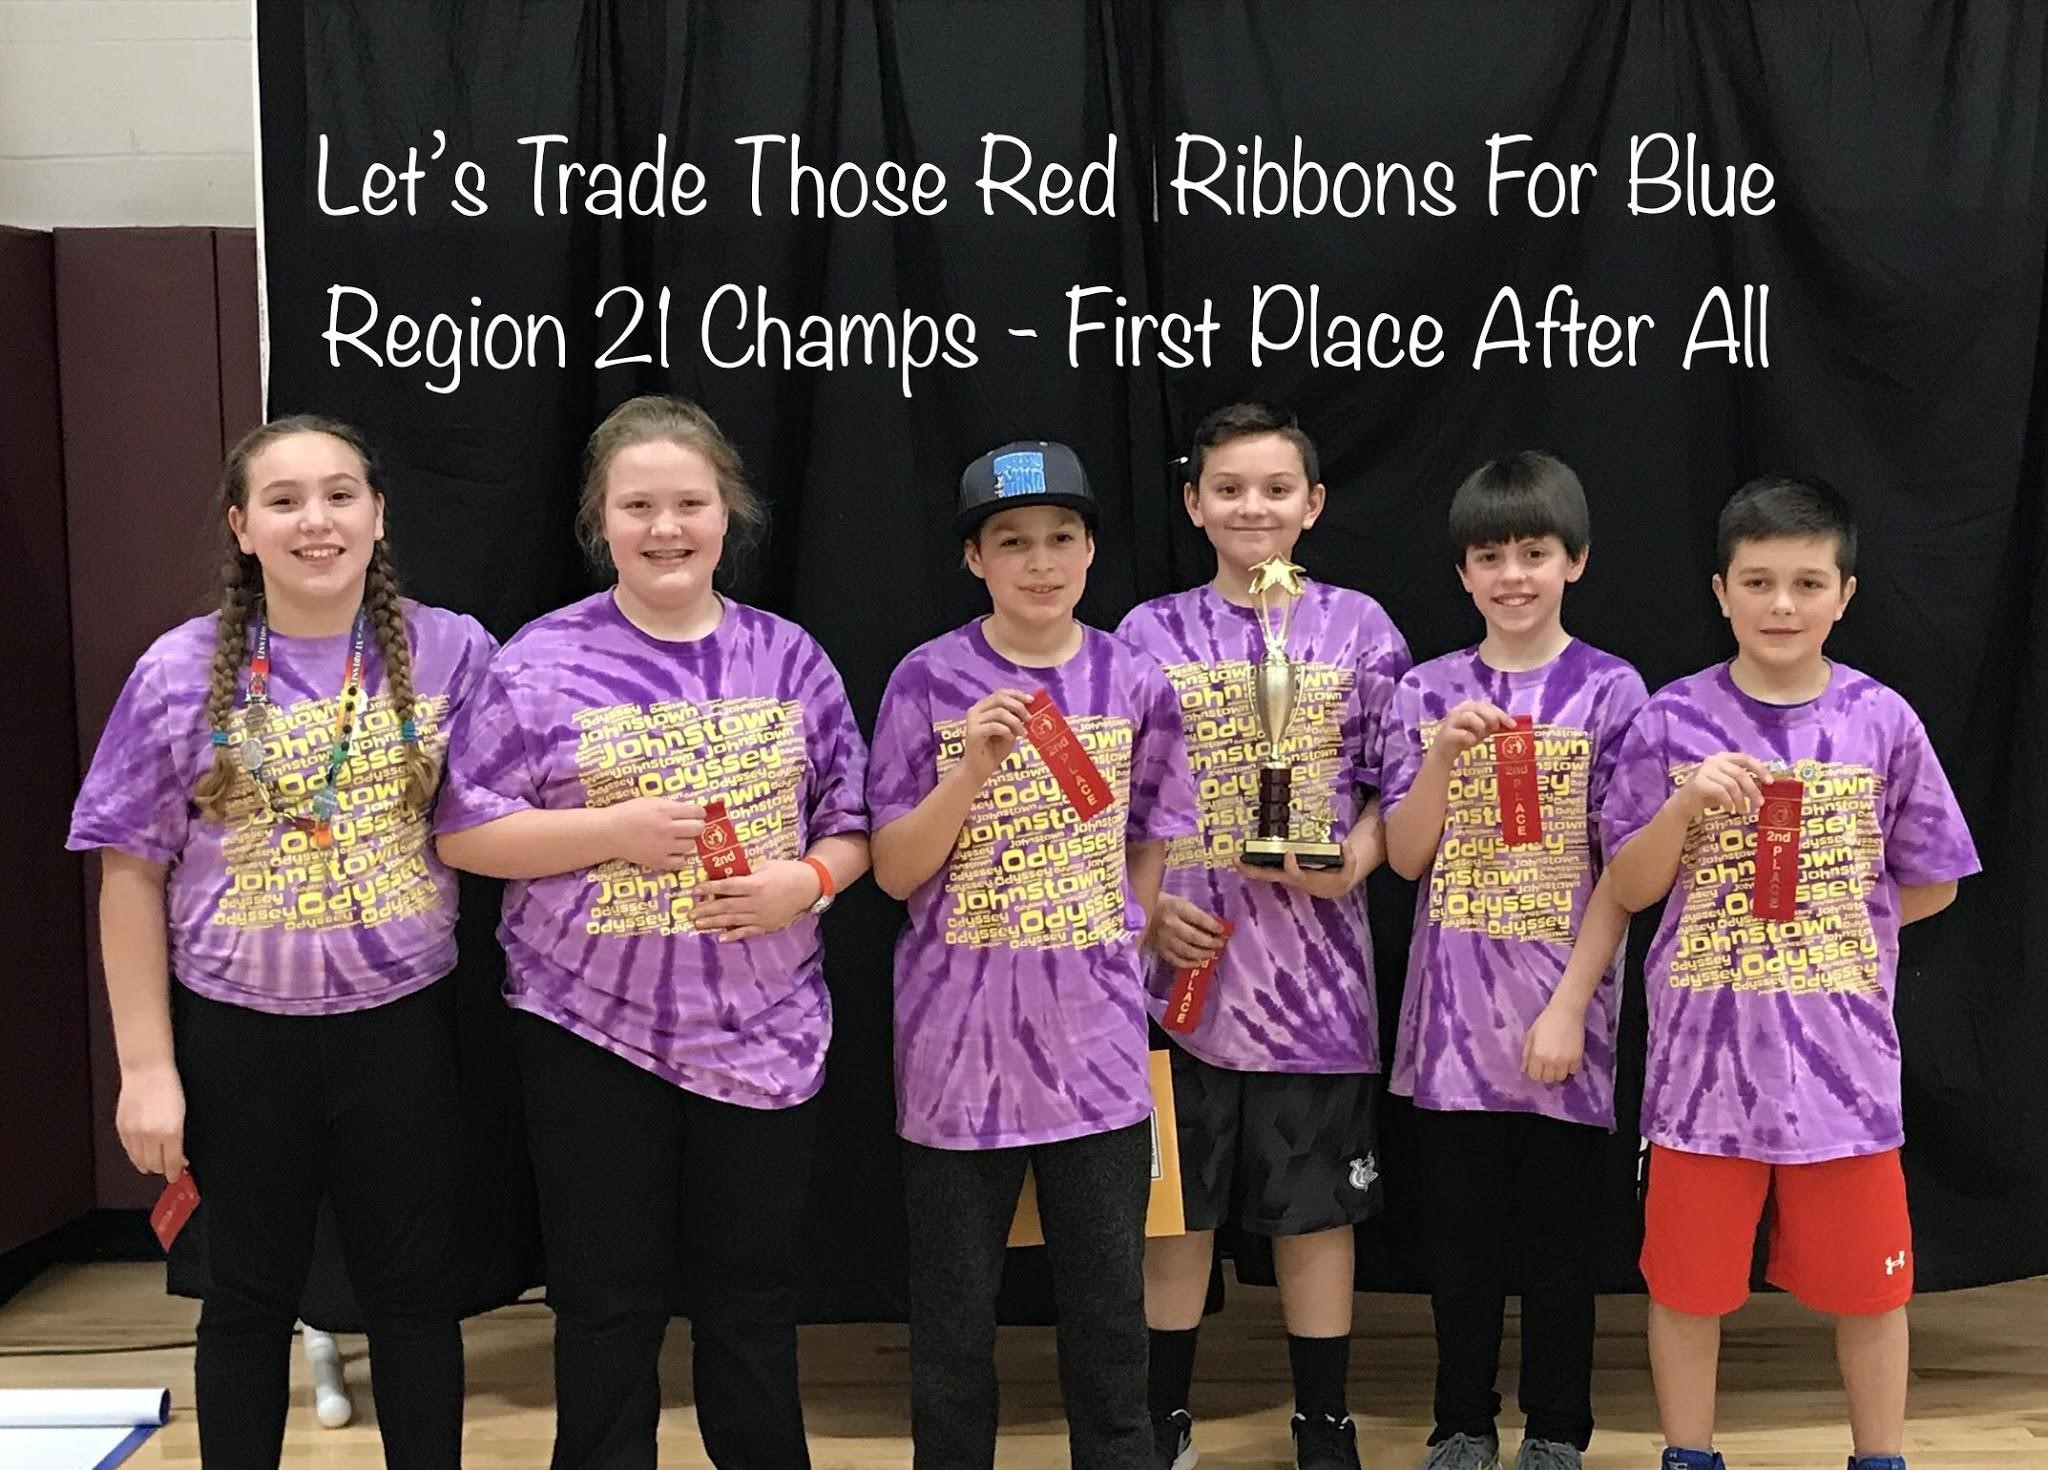 6th Grade Structure Team @ Warren Street, Coached by Mr. Chad Kortz Due to a scoring error, this team was recognized for 2nd place at the awards program but wound up winning 1st in their problem and division!